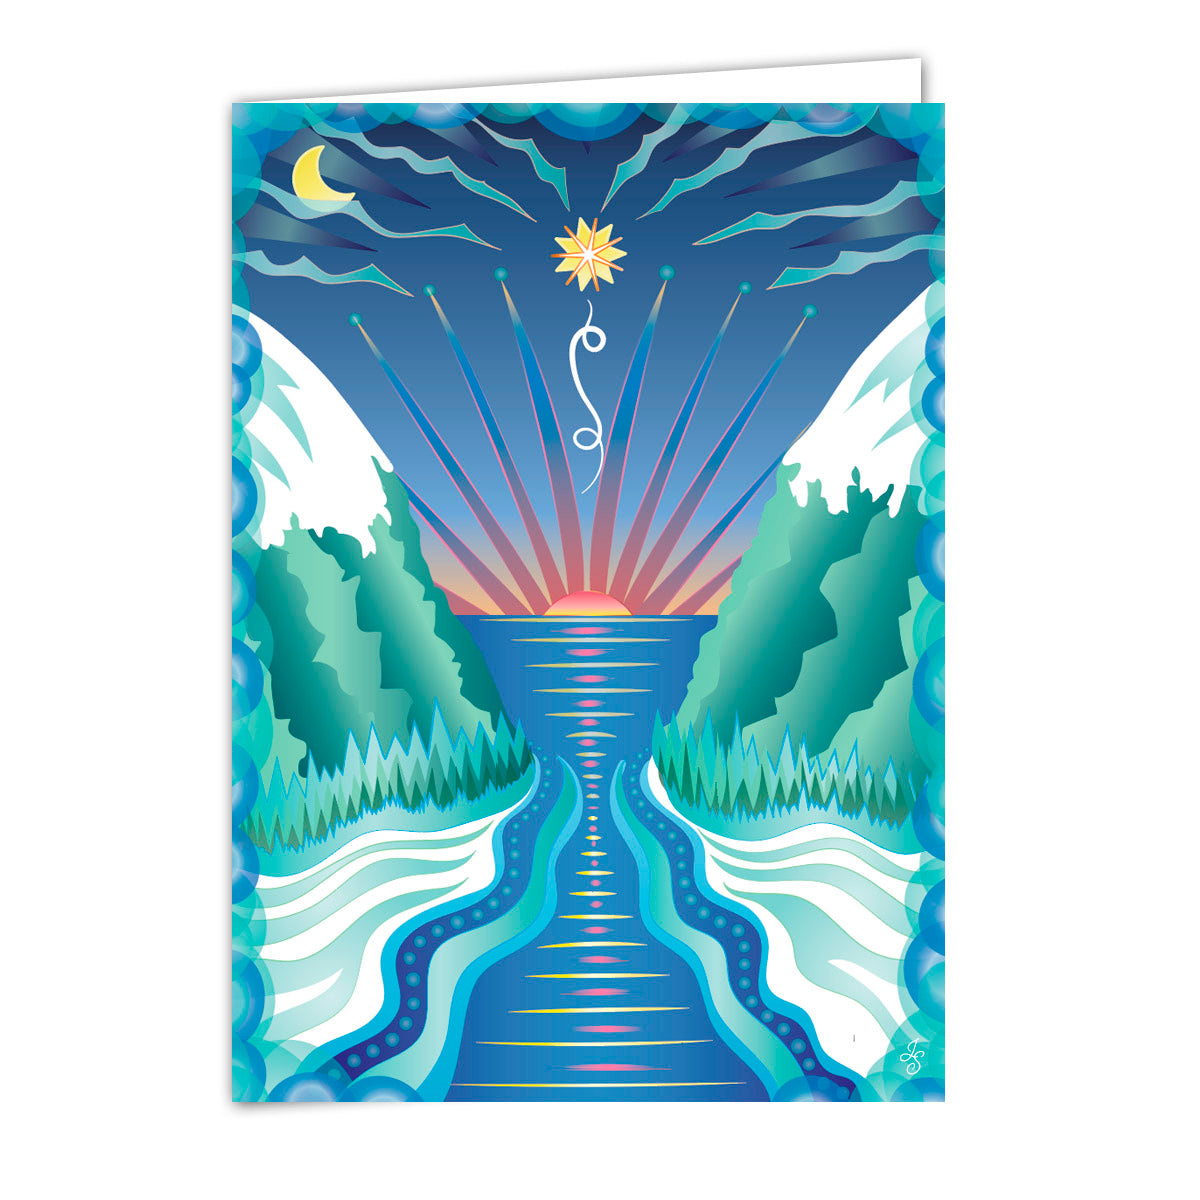 Mockup for greeting card design showing an illustrated sundown over a winter river scene with moon and a guiding star above